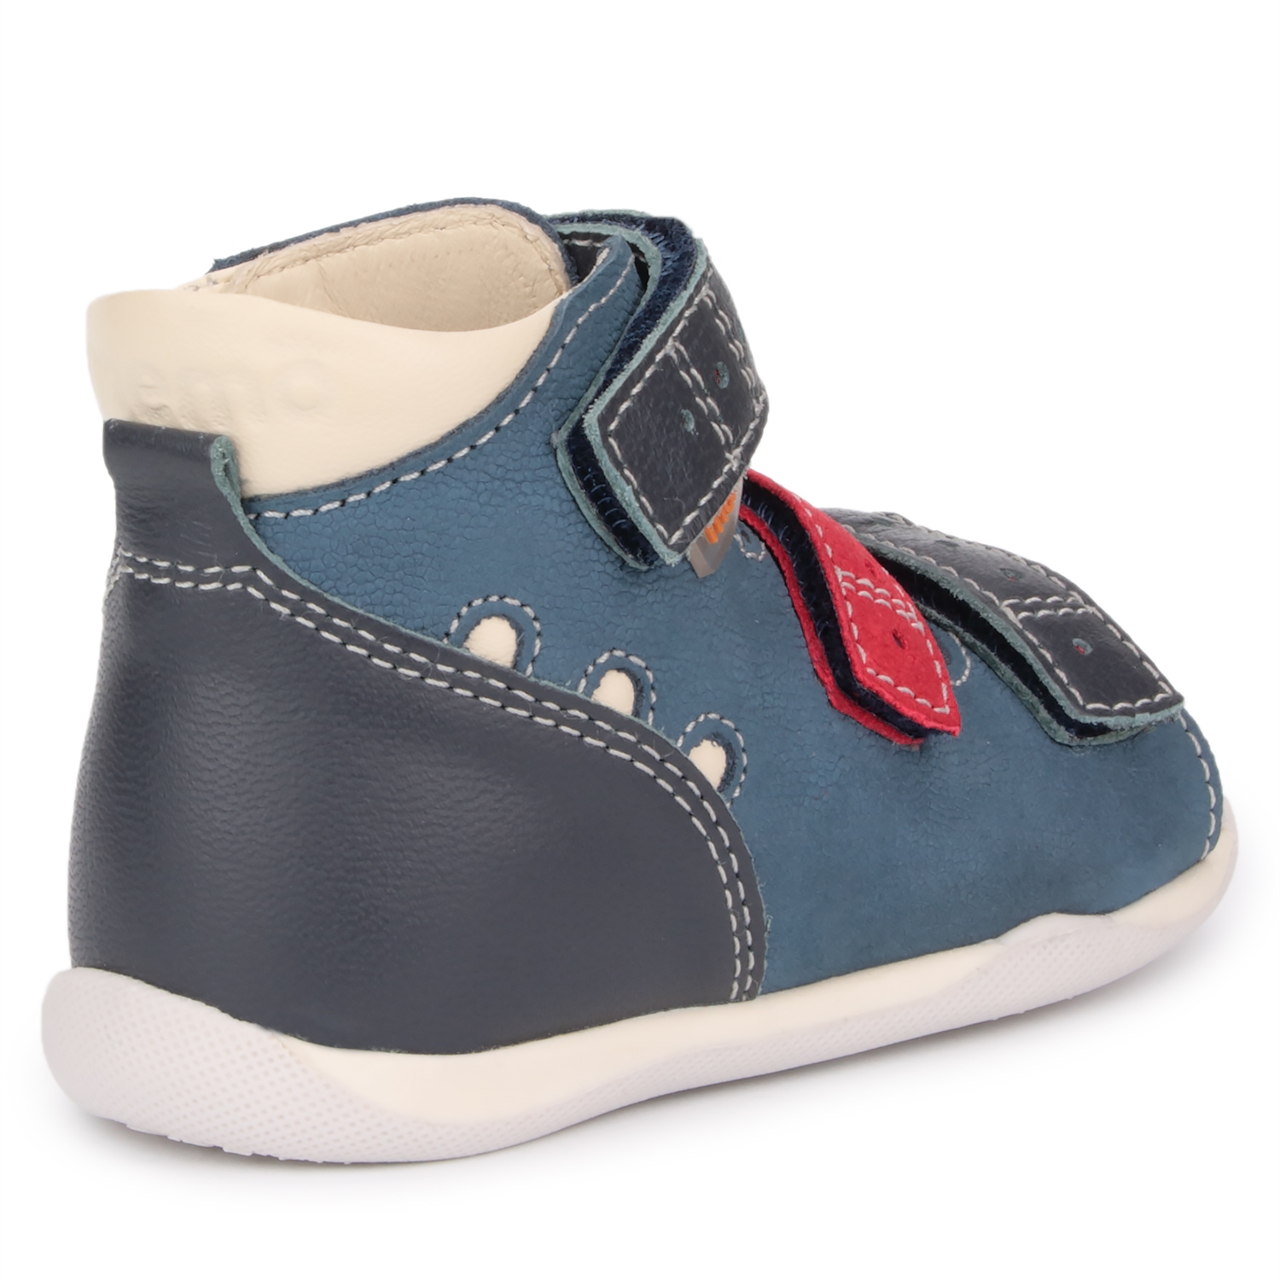 Memo Shoes. Memo Dino Navy Blue/Red First Walker Sandals — Orthopedic Shoes